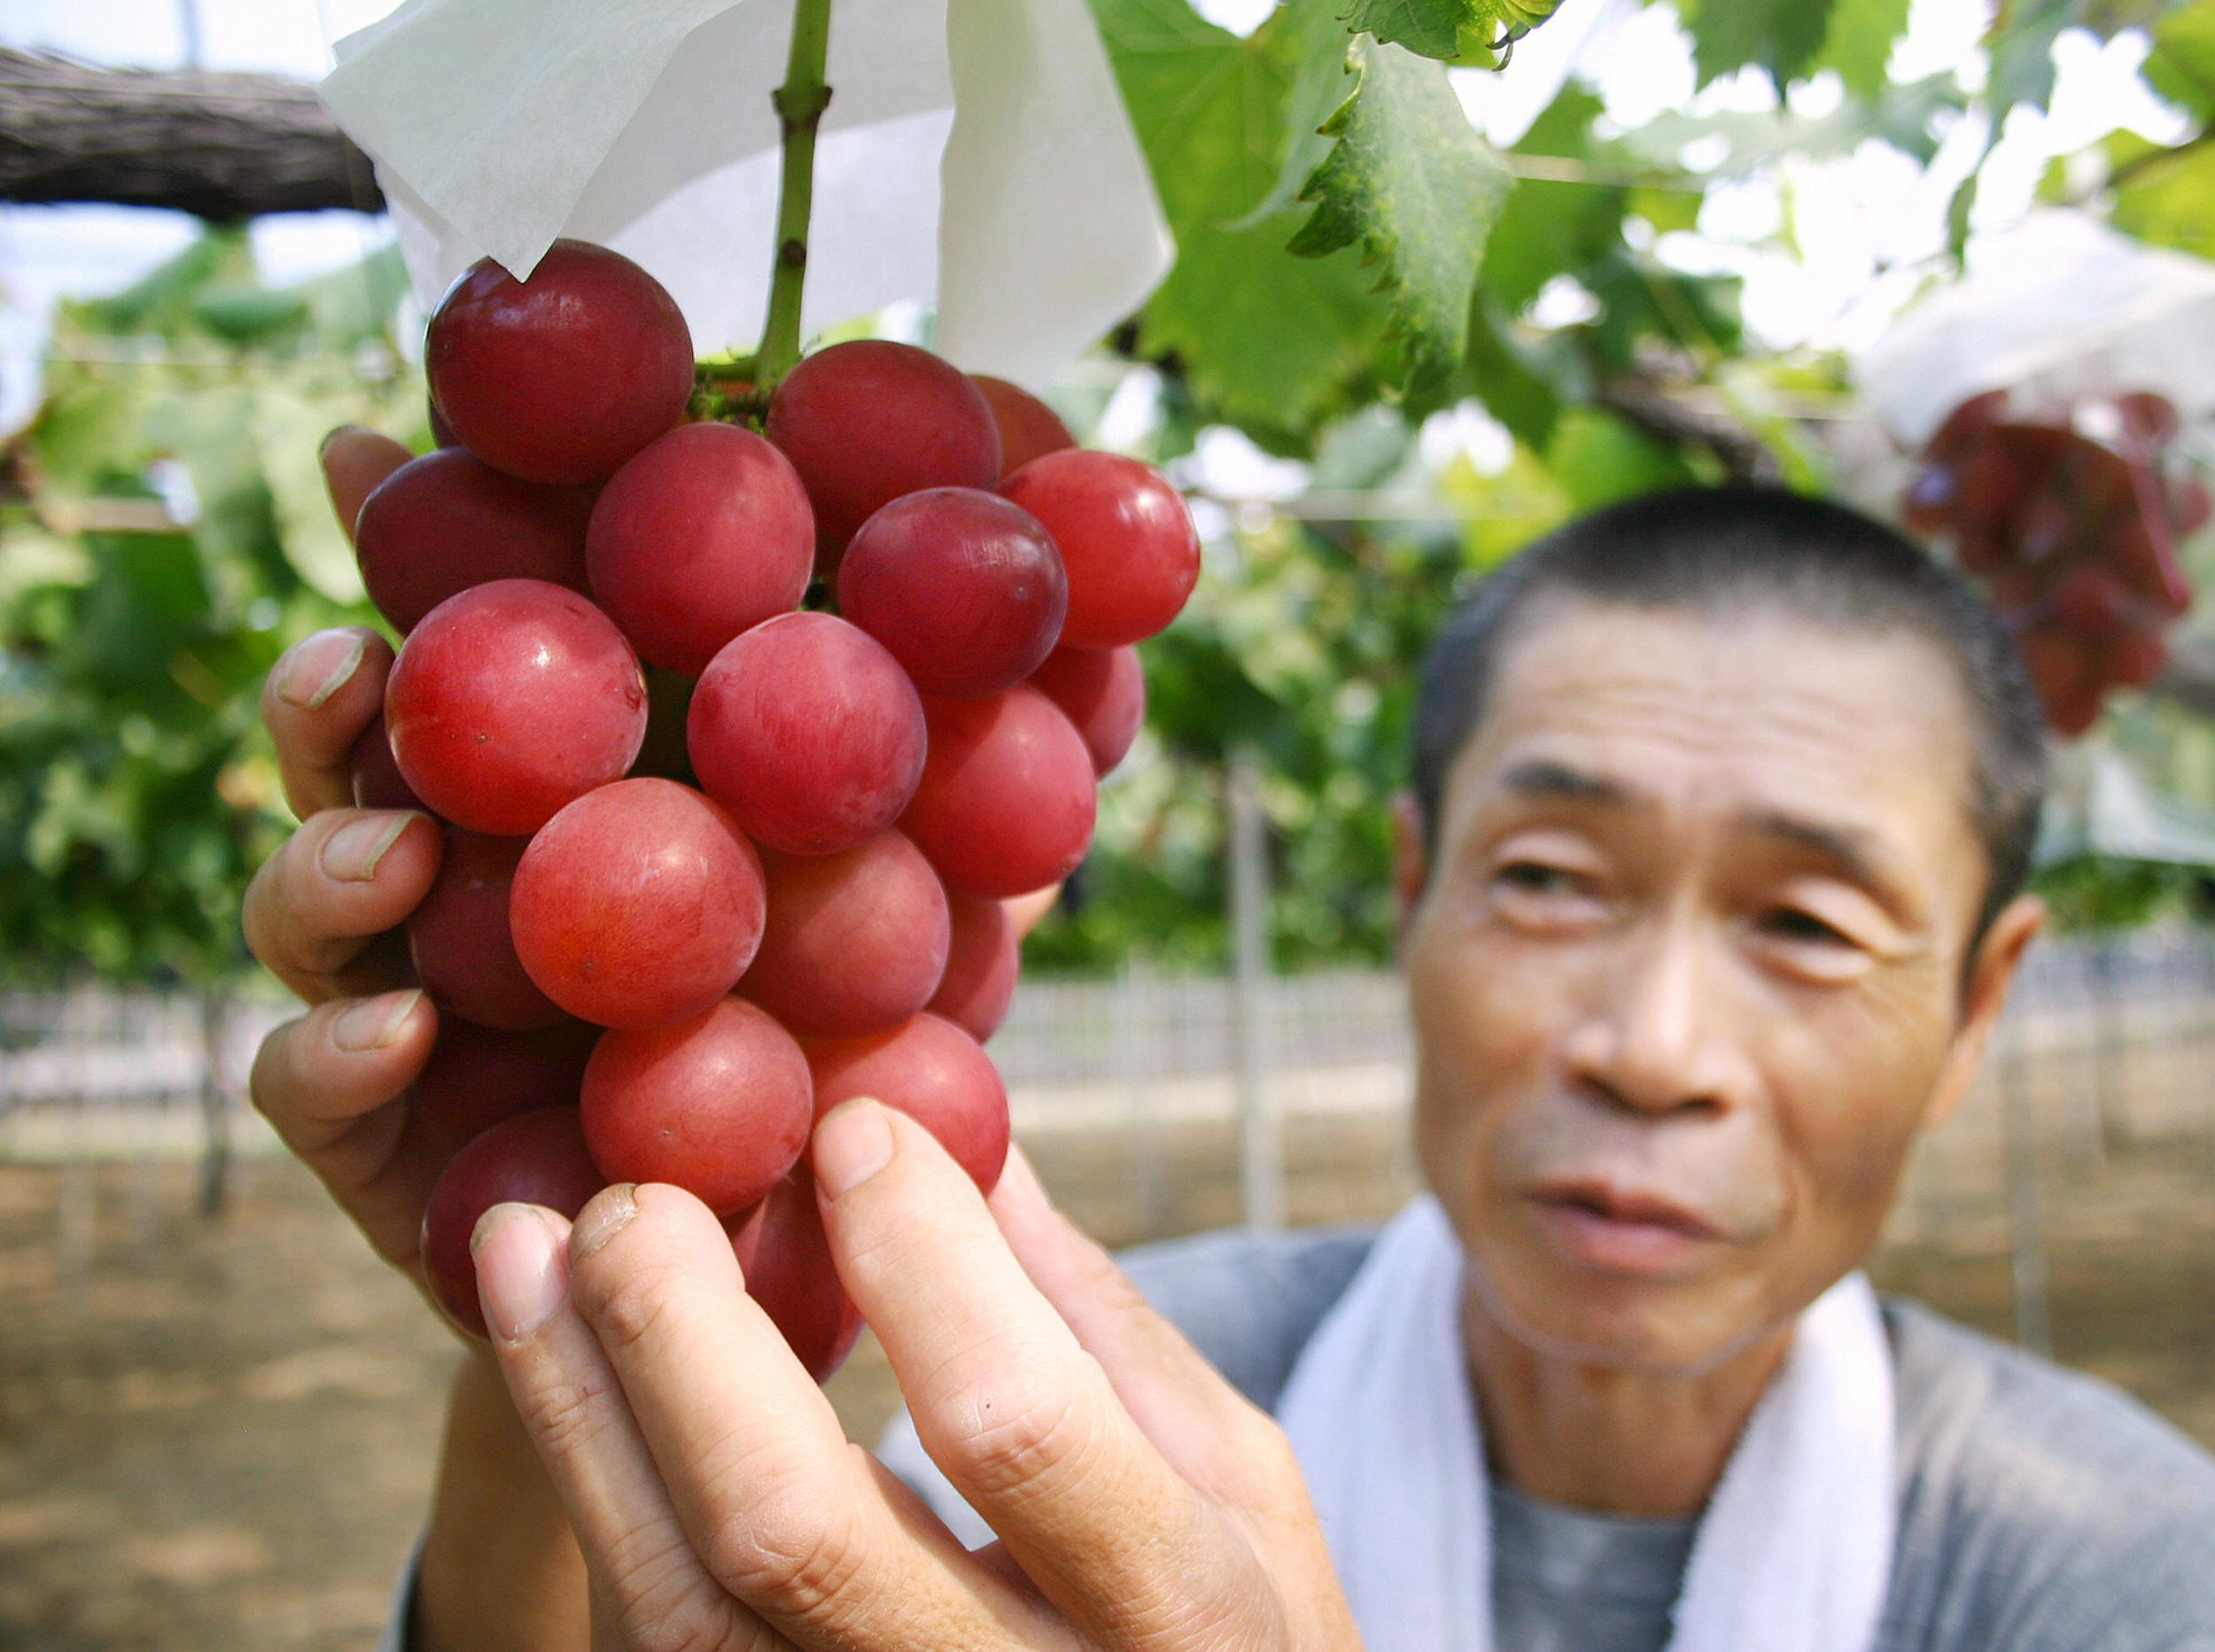 Bunch of Japan grapes fetches $12,700